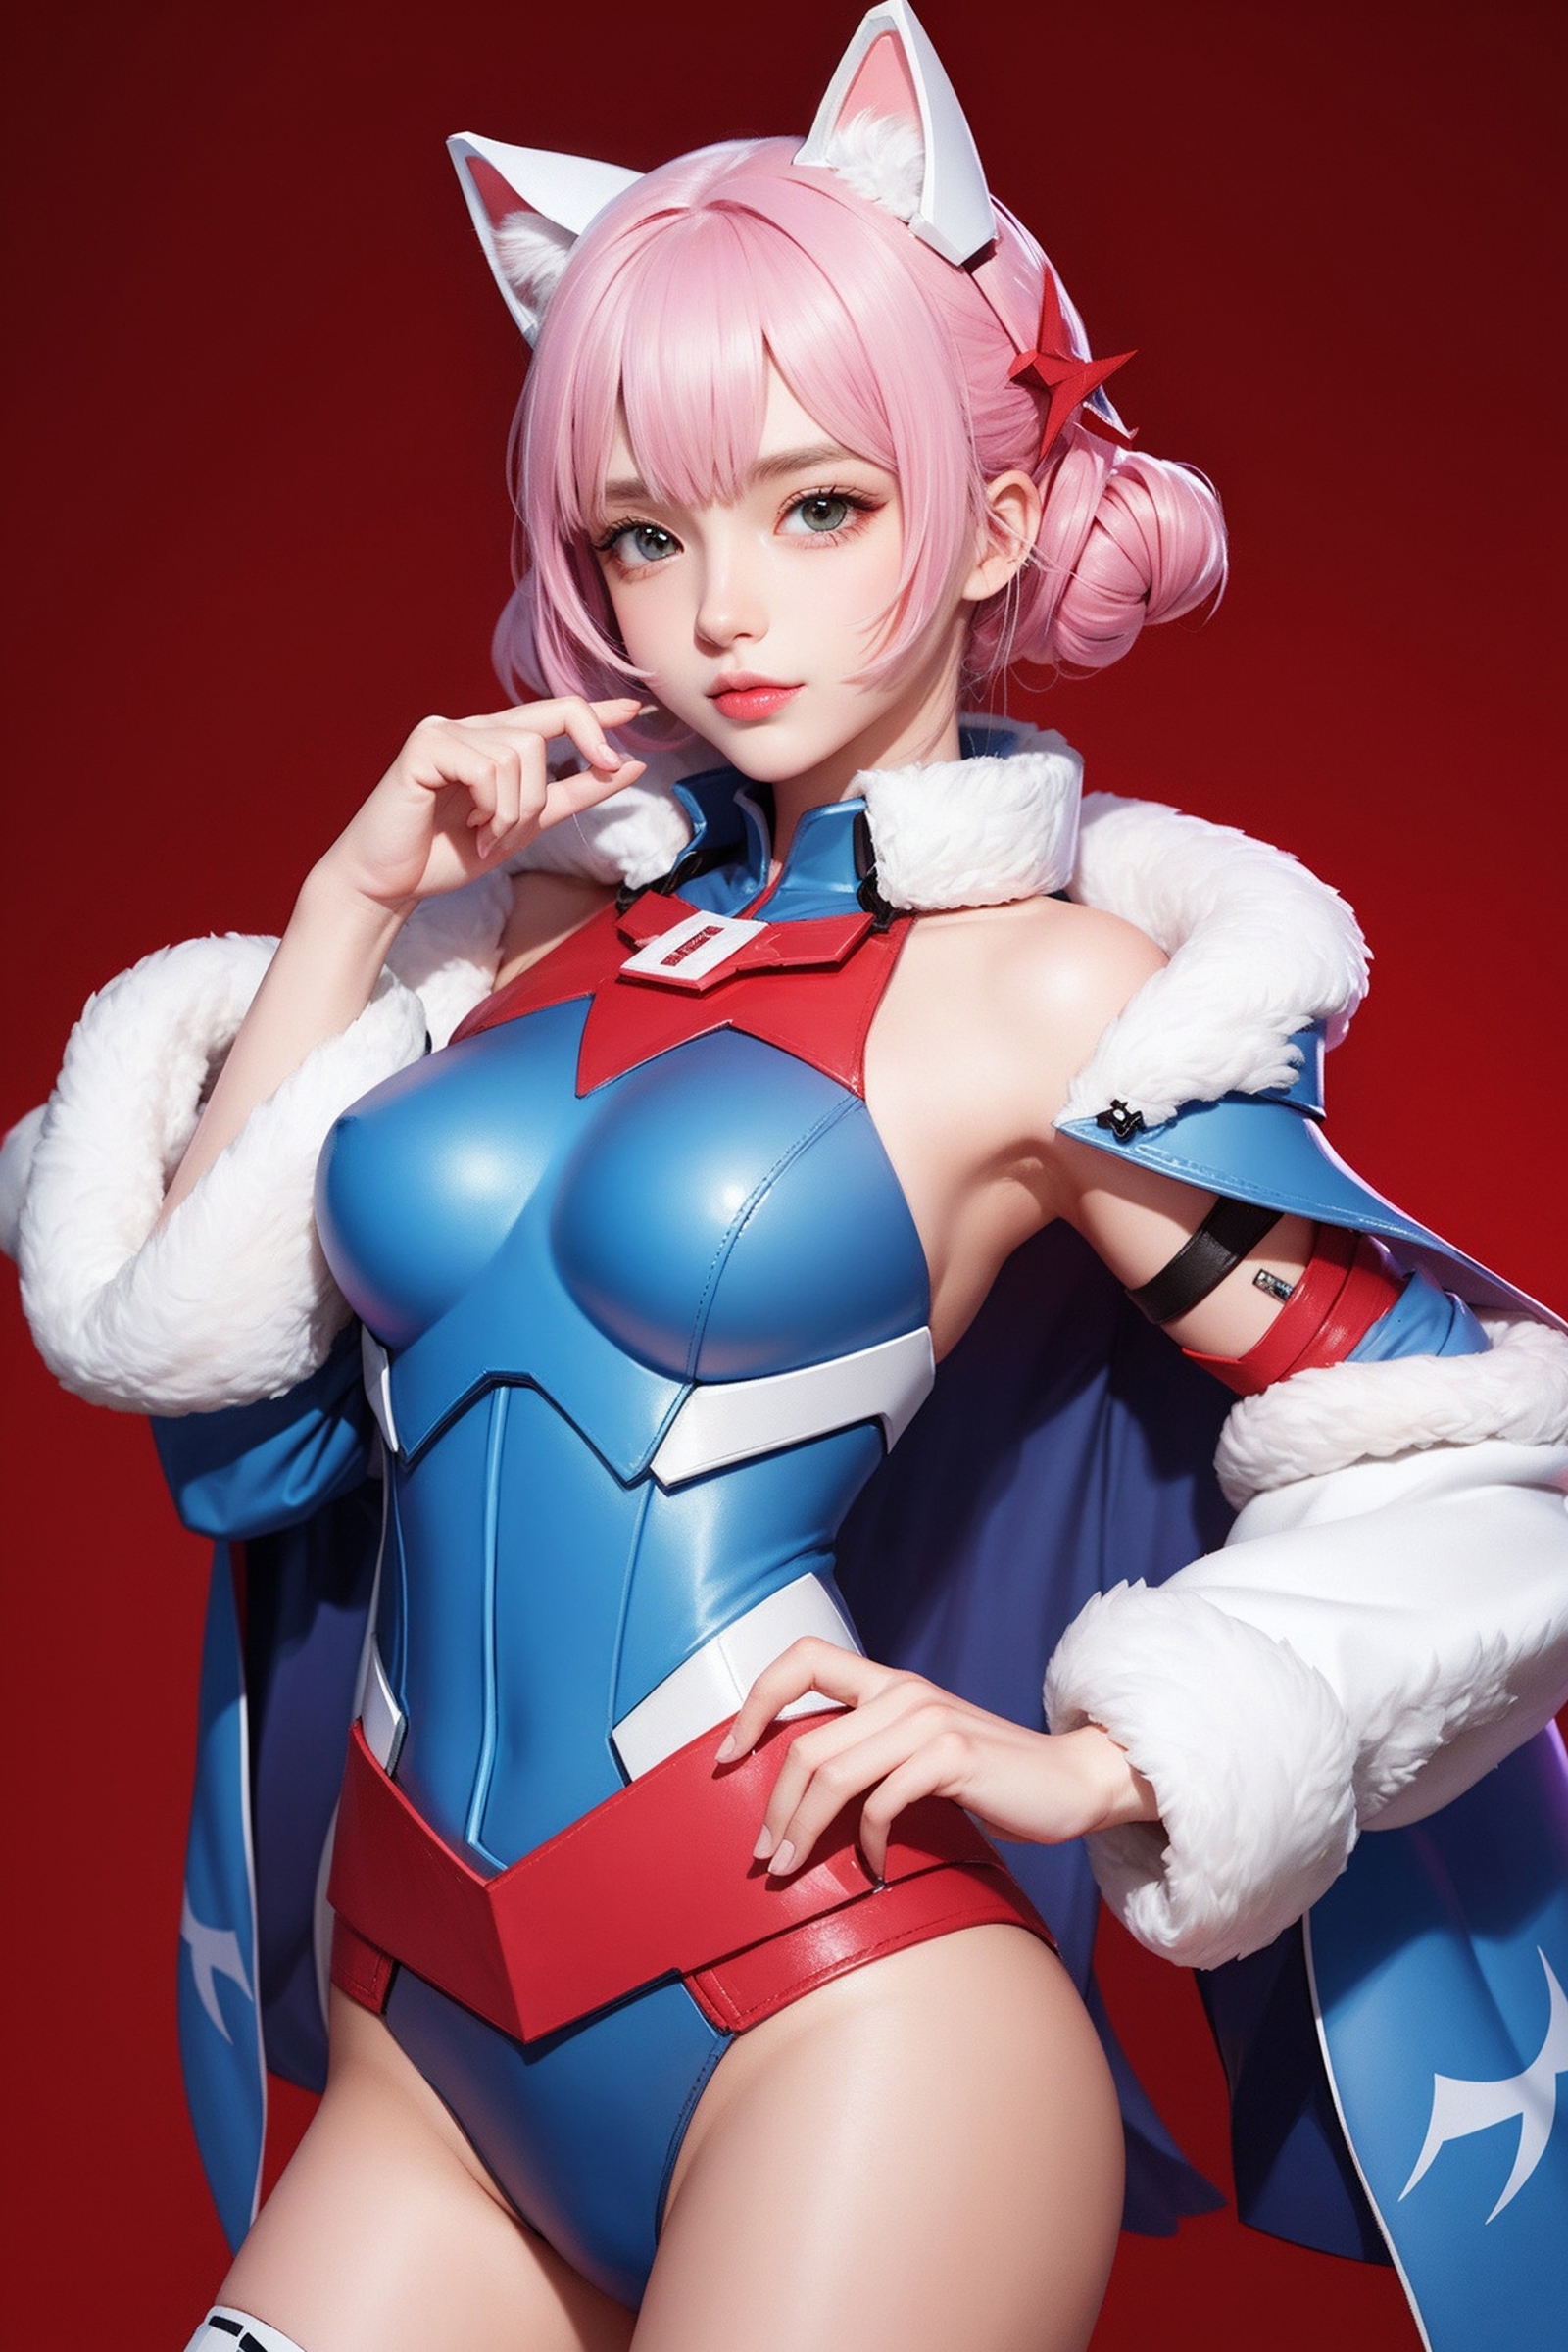 Anime Character with Pink Hair, Blue and Red Costume, and White Fur.